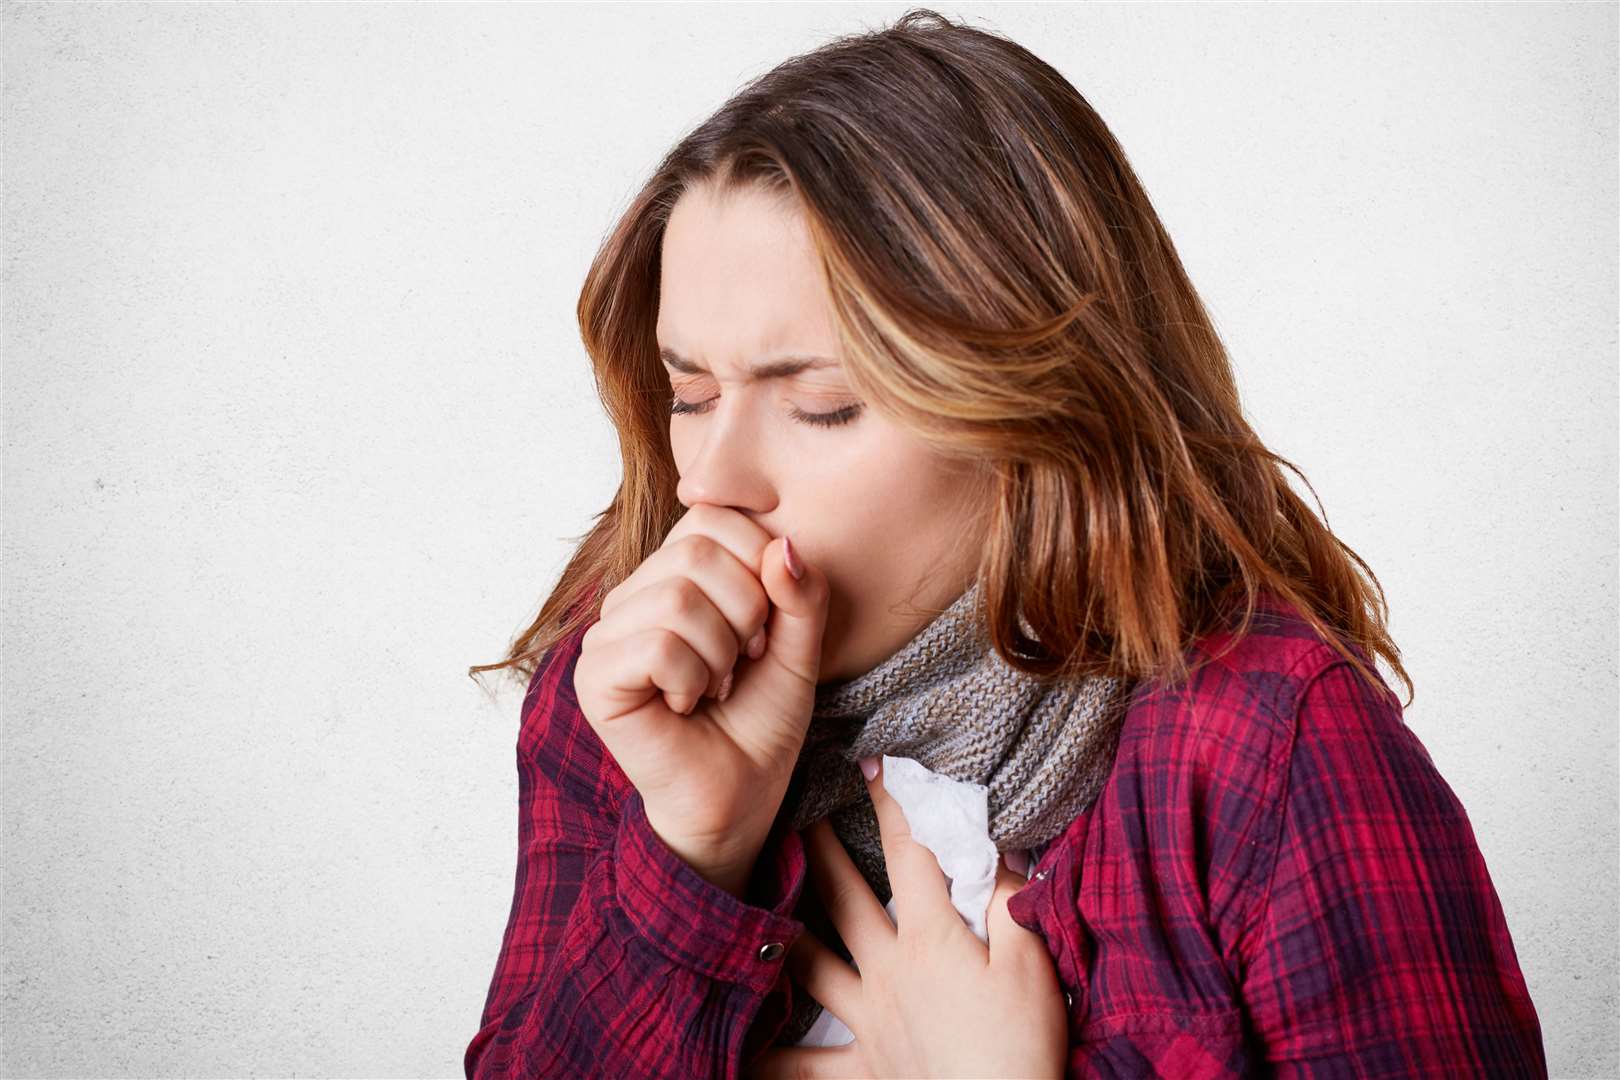 A cough is one of the symptoms of long Covid.